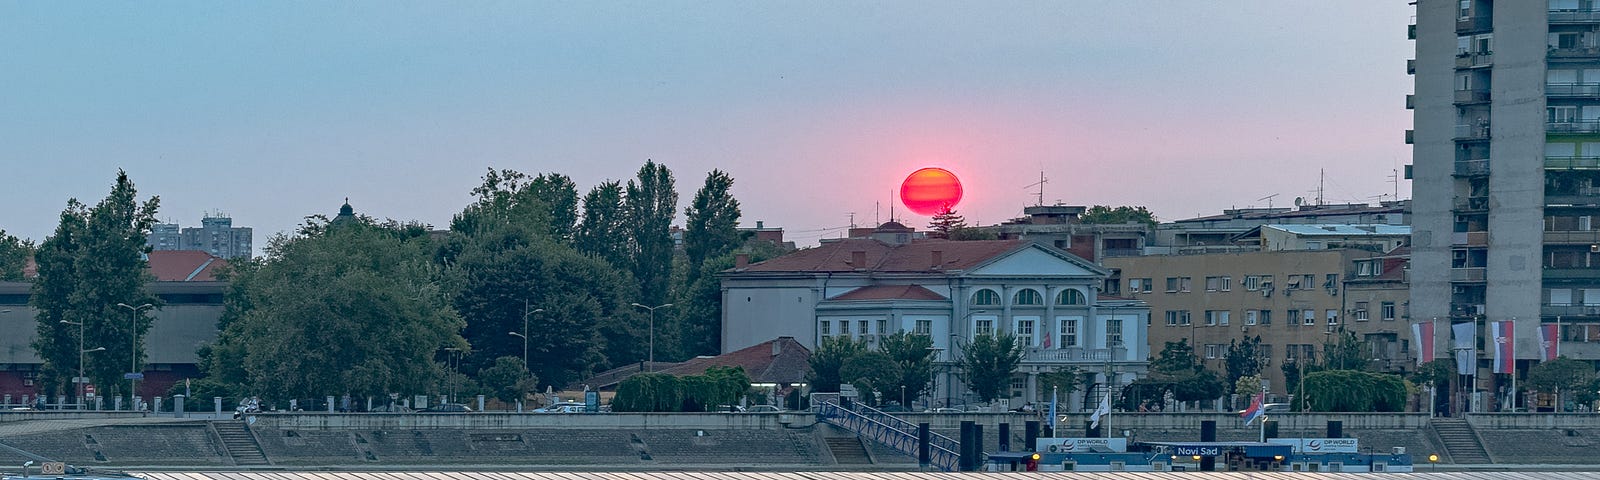 A bright red sun floats over historic buildings and a river. A boat floats on the river.